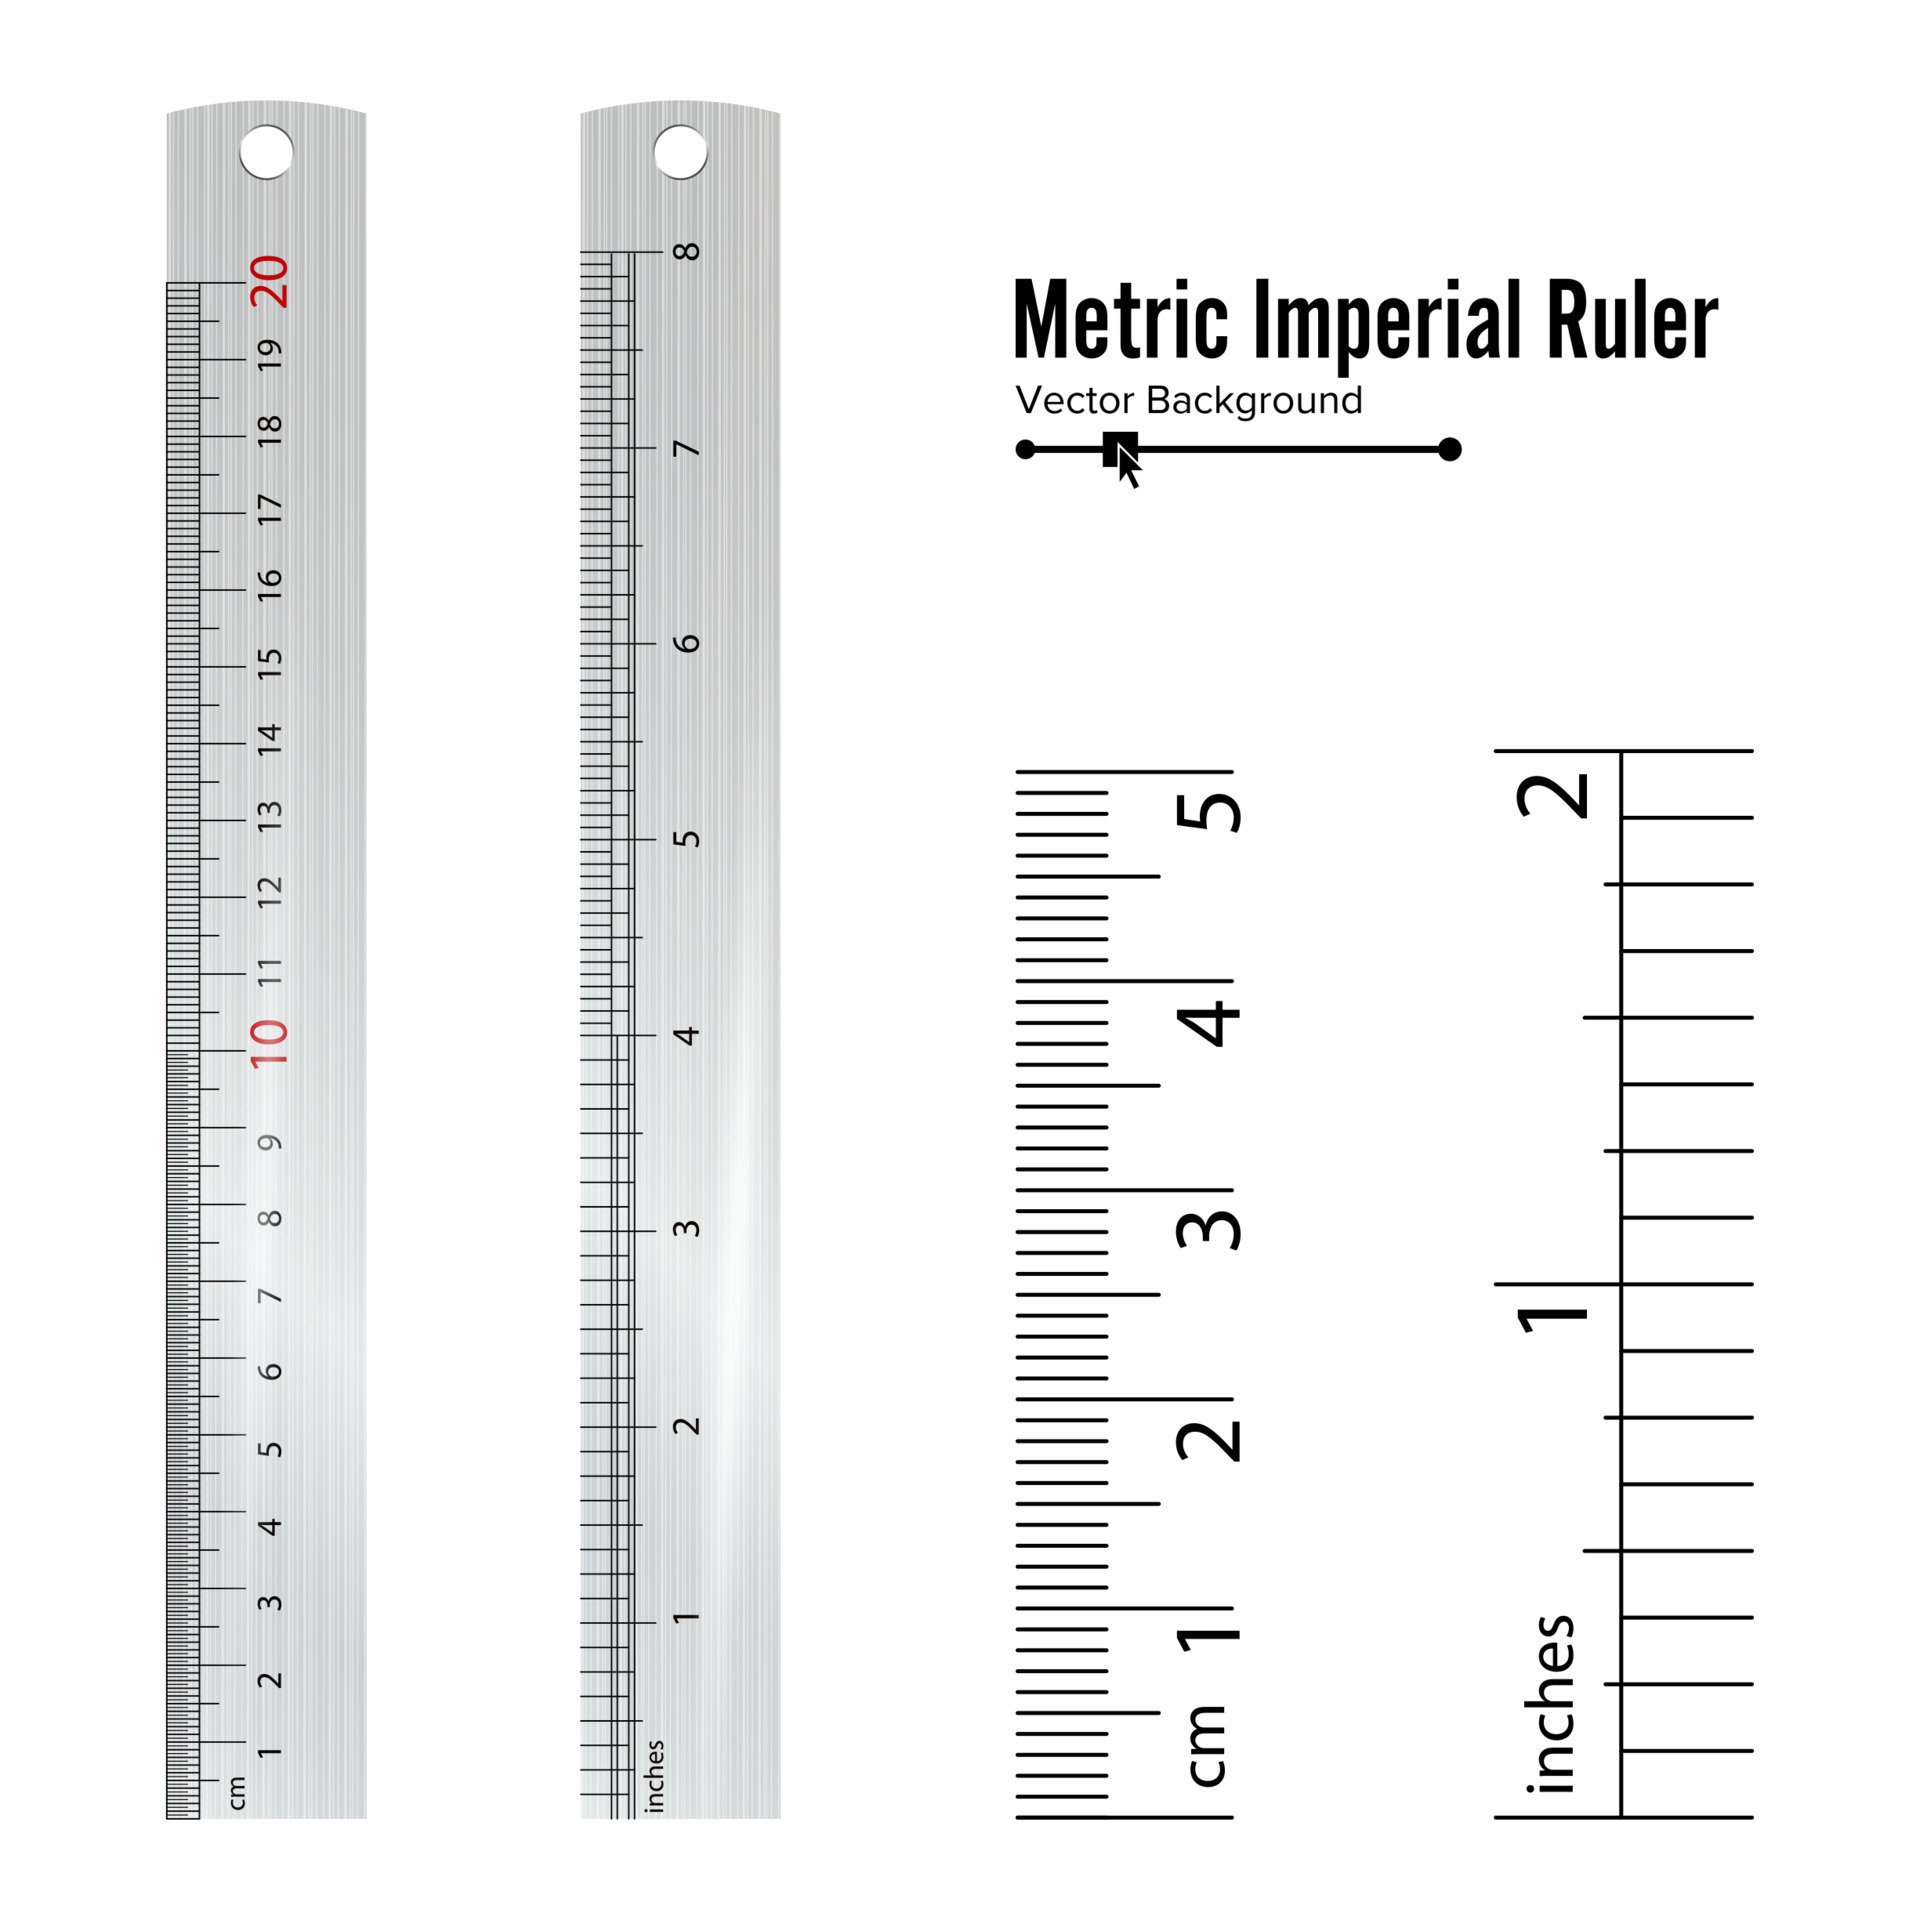 https://static.vecteezy.com/system/resources/previews/017/351/211/original/metric-imperial-rulers-centimeter-and-inch-measure-tools-equipment-illustration-isolated-on-white-background-vector.jpg